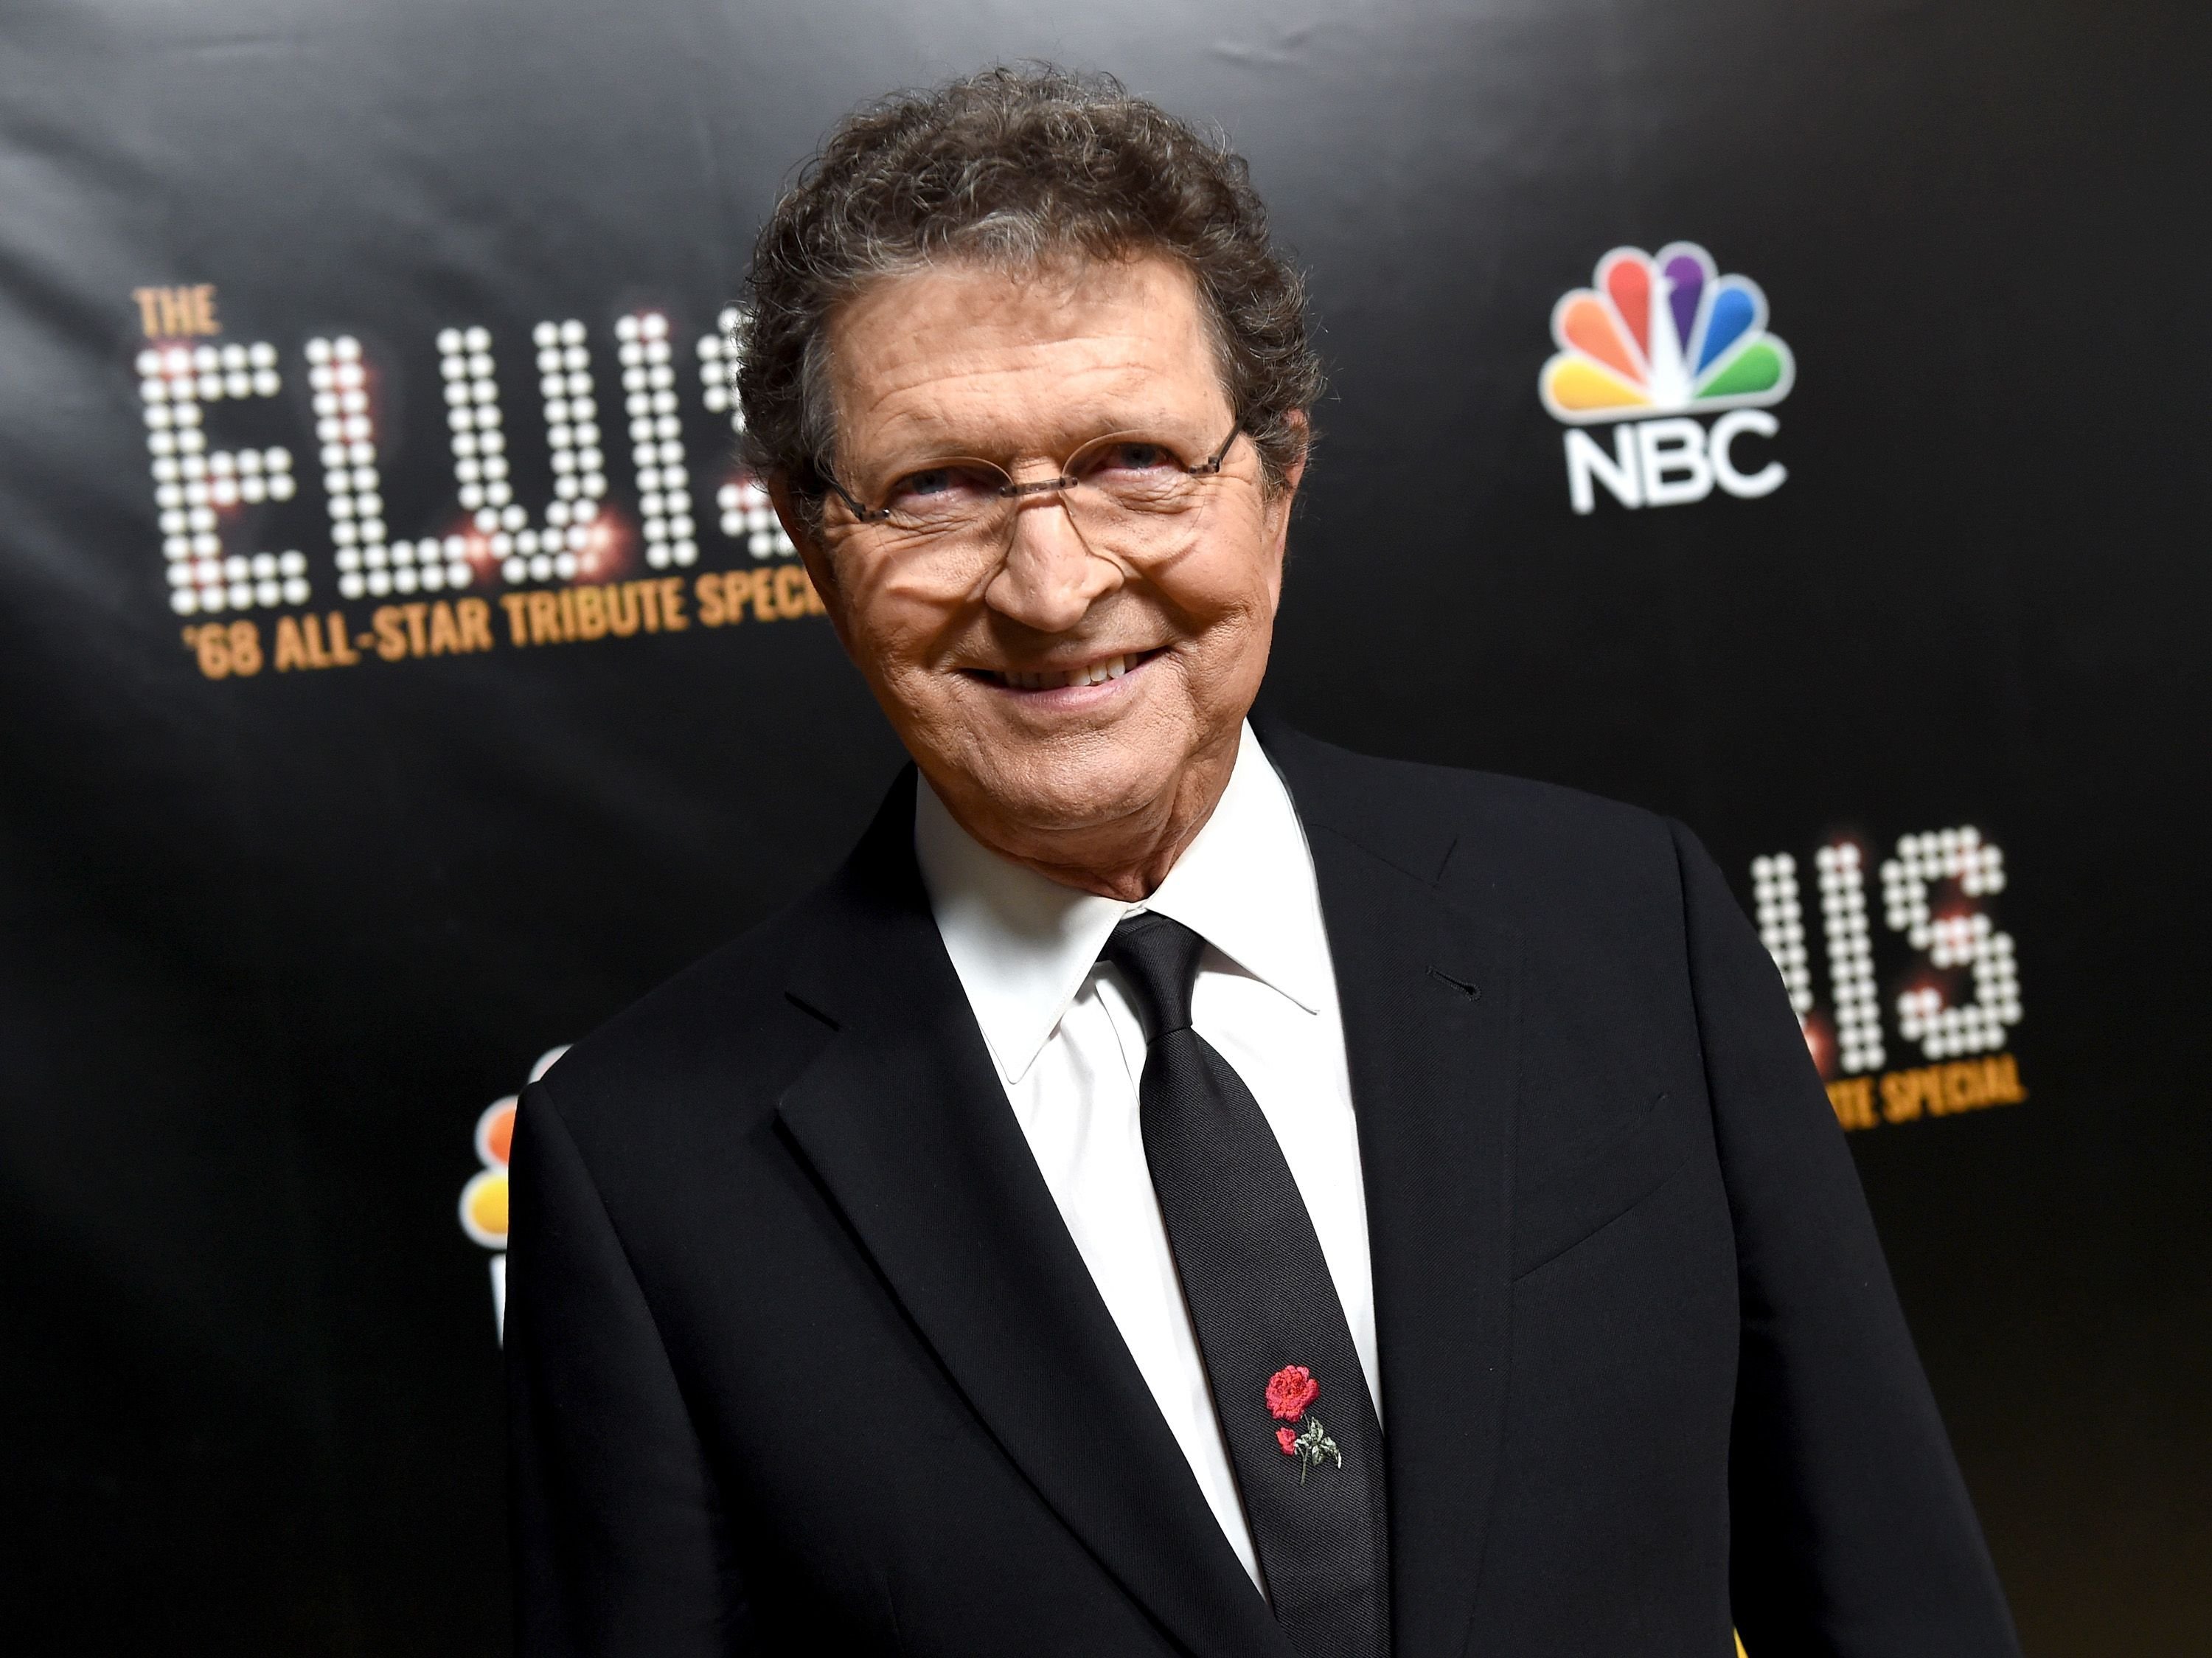 Mac Davis at The Elvis '68 All-Star Tribute Special at Universal Studios on October 11, 2018 in Universal City, California. | Photo: Getty Images